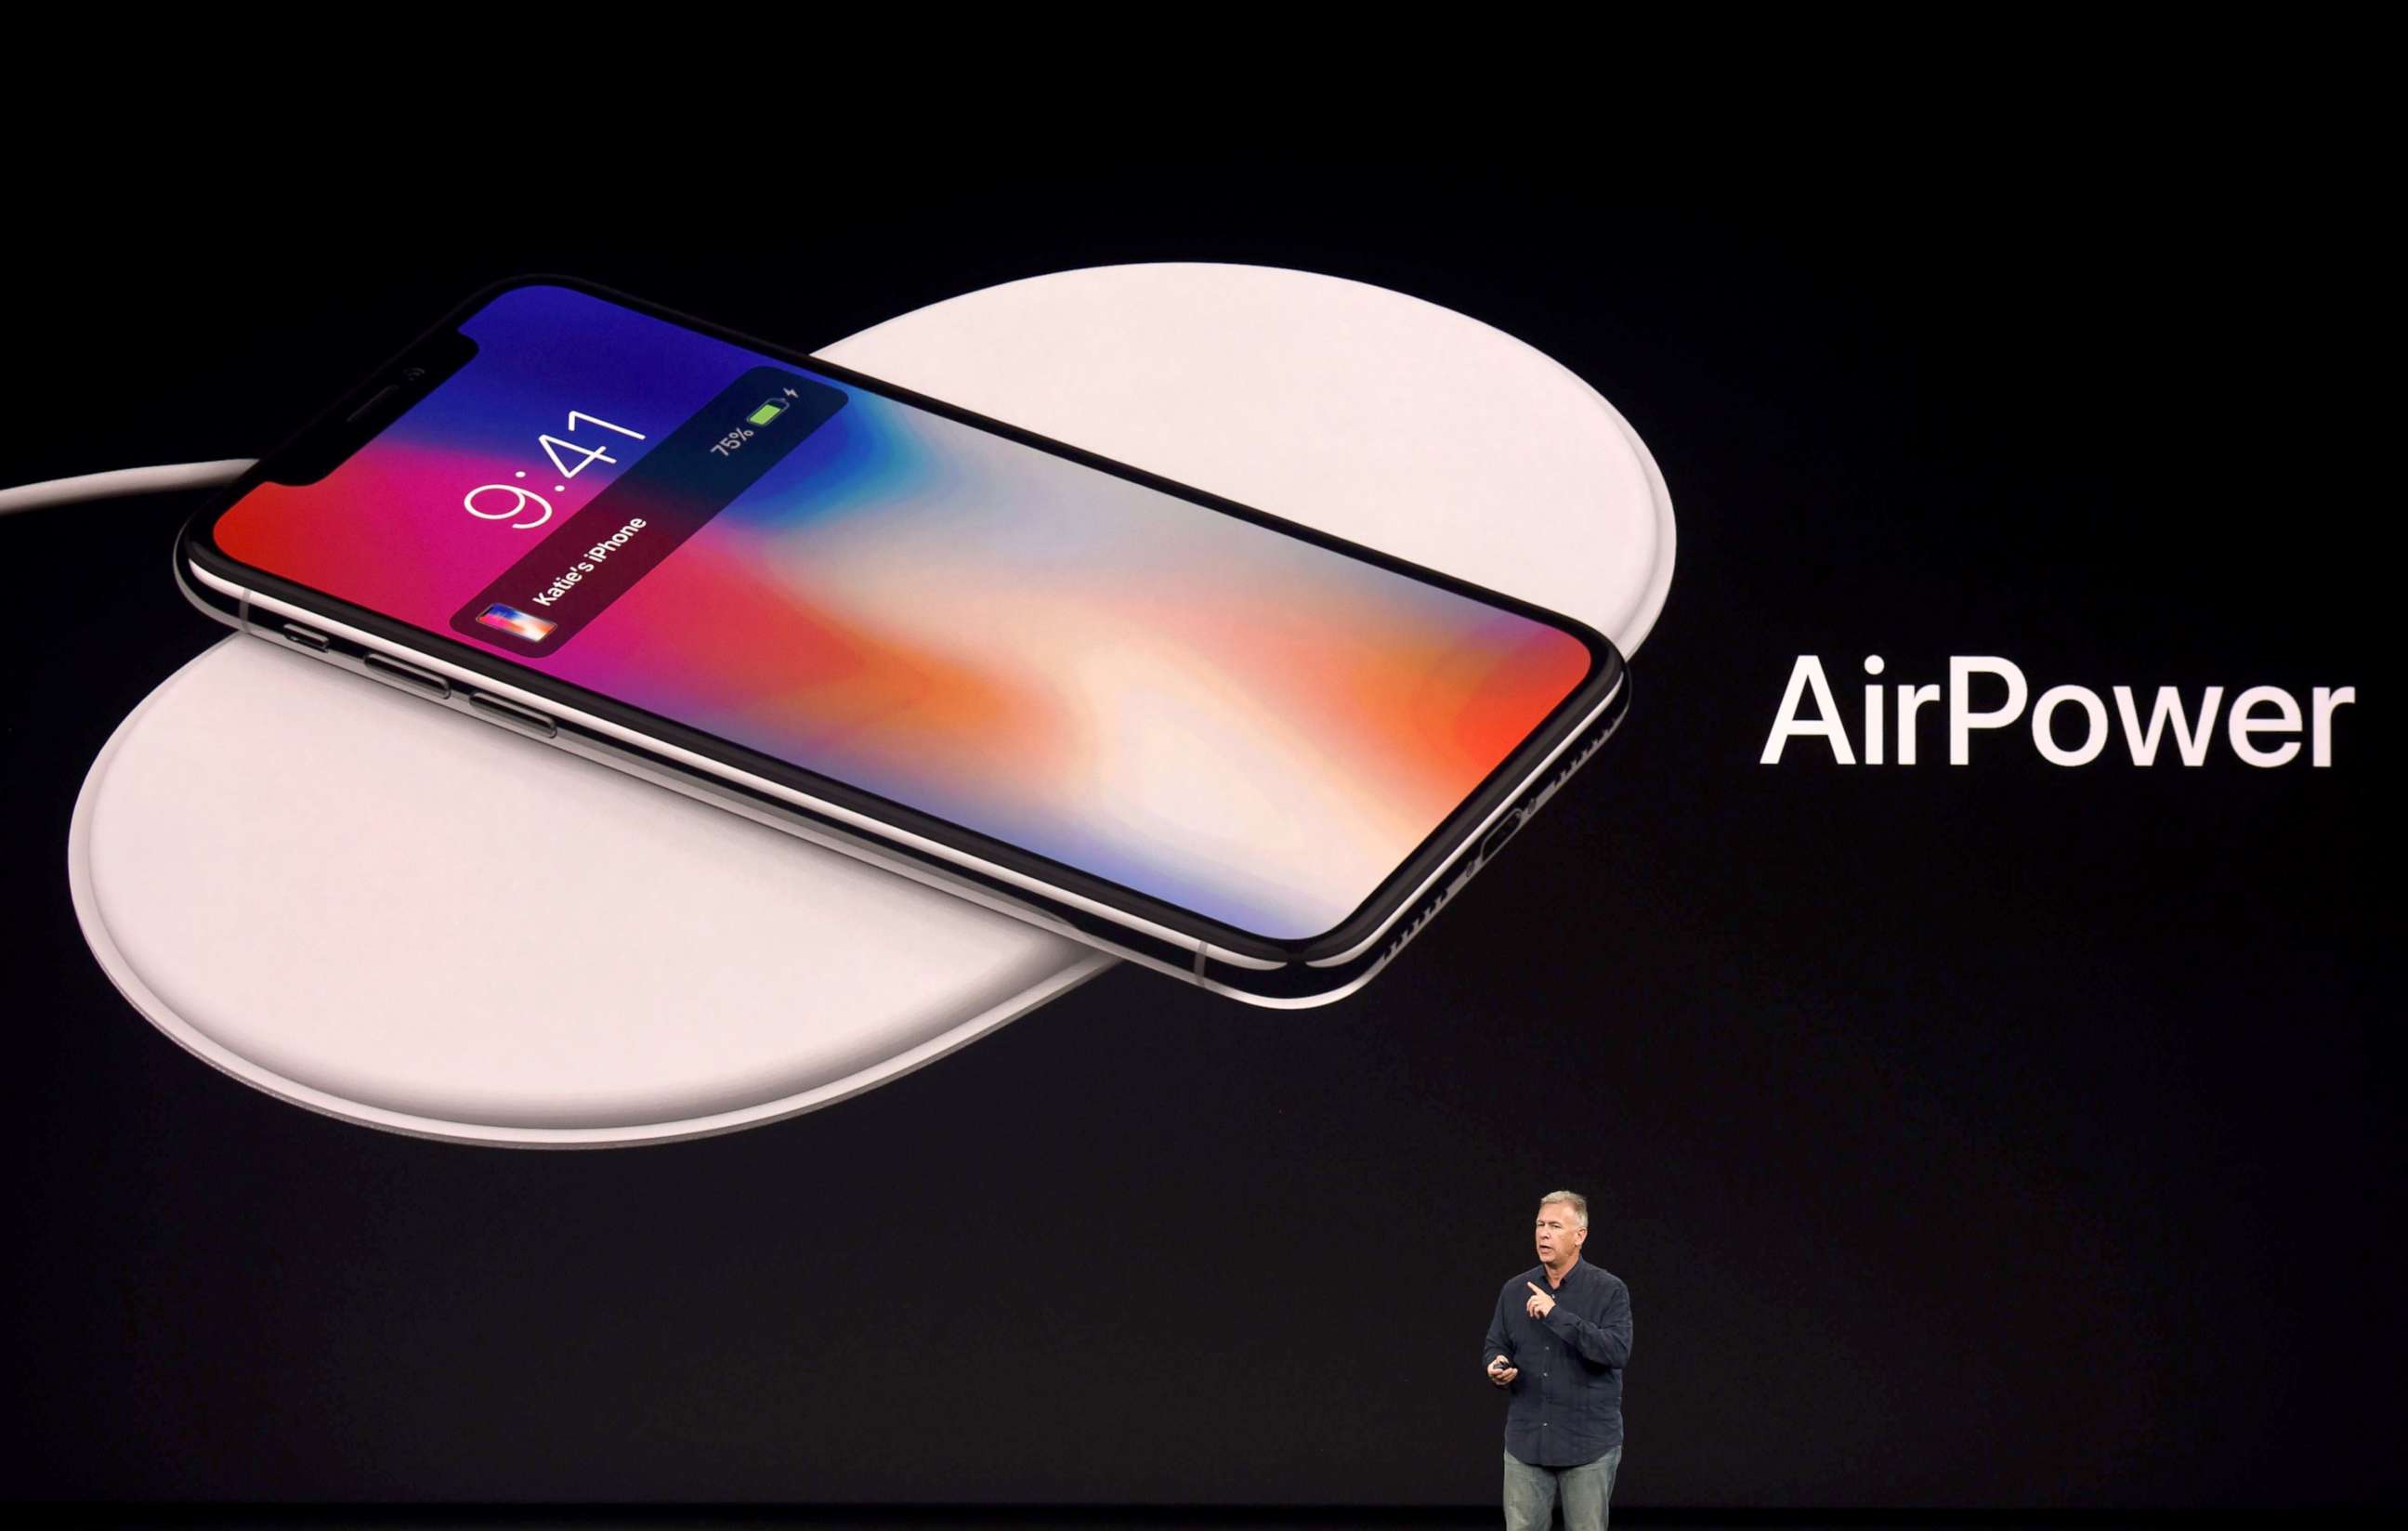 PHOTO: Senior Vice President of Worldwide Marketing at Apple Philip Schiller introduces AirPower, a wireless charging system, during a media event in Cupertino, Calif., Sept. 12, 2017.